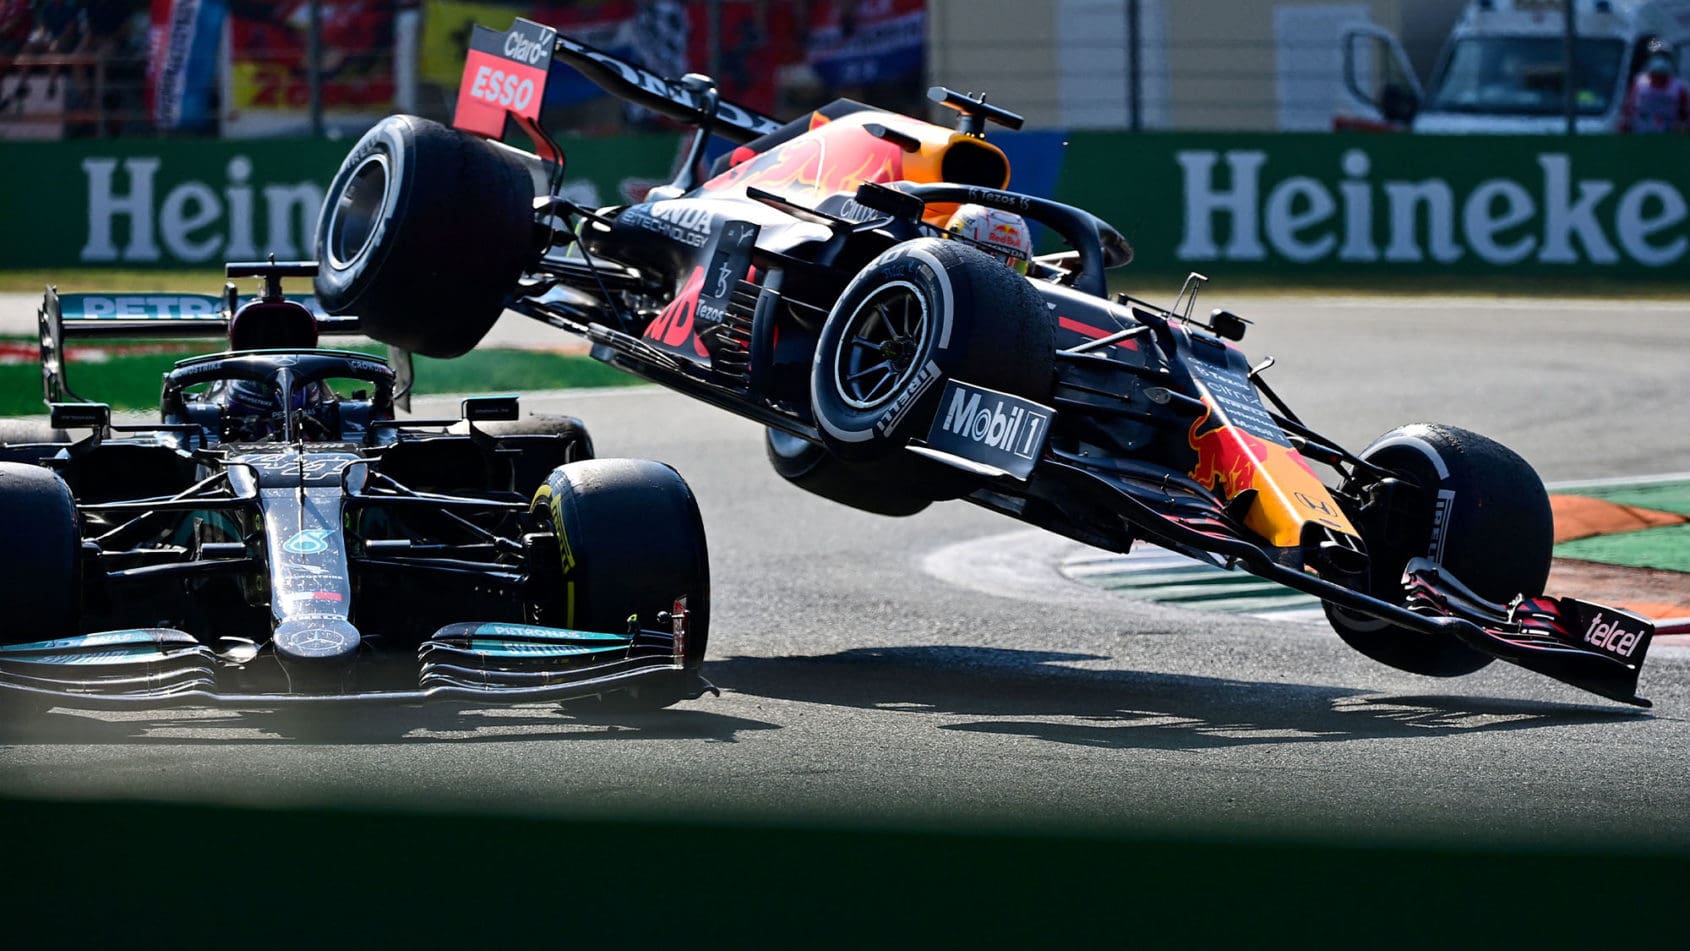 It was TAG Heuer vs IWC in the Italian Grand Prix crash – but was either driver really at fault?